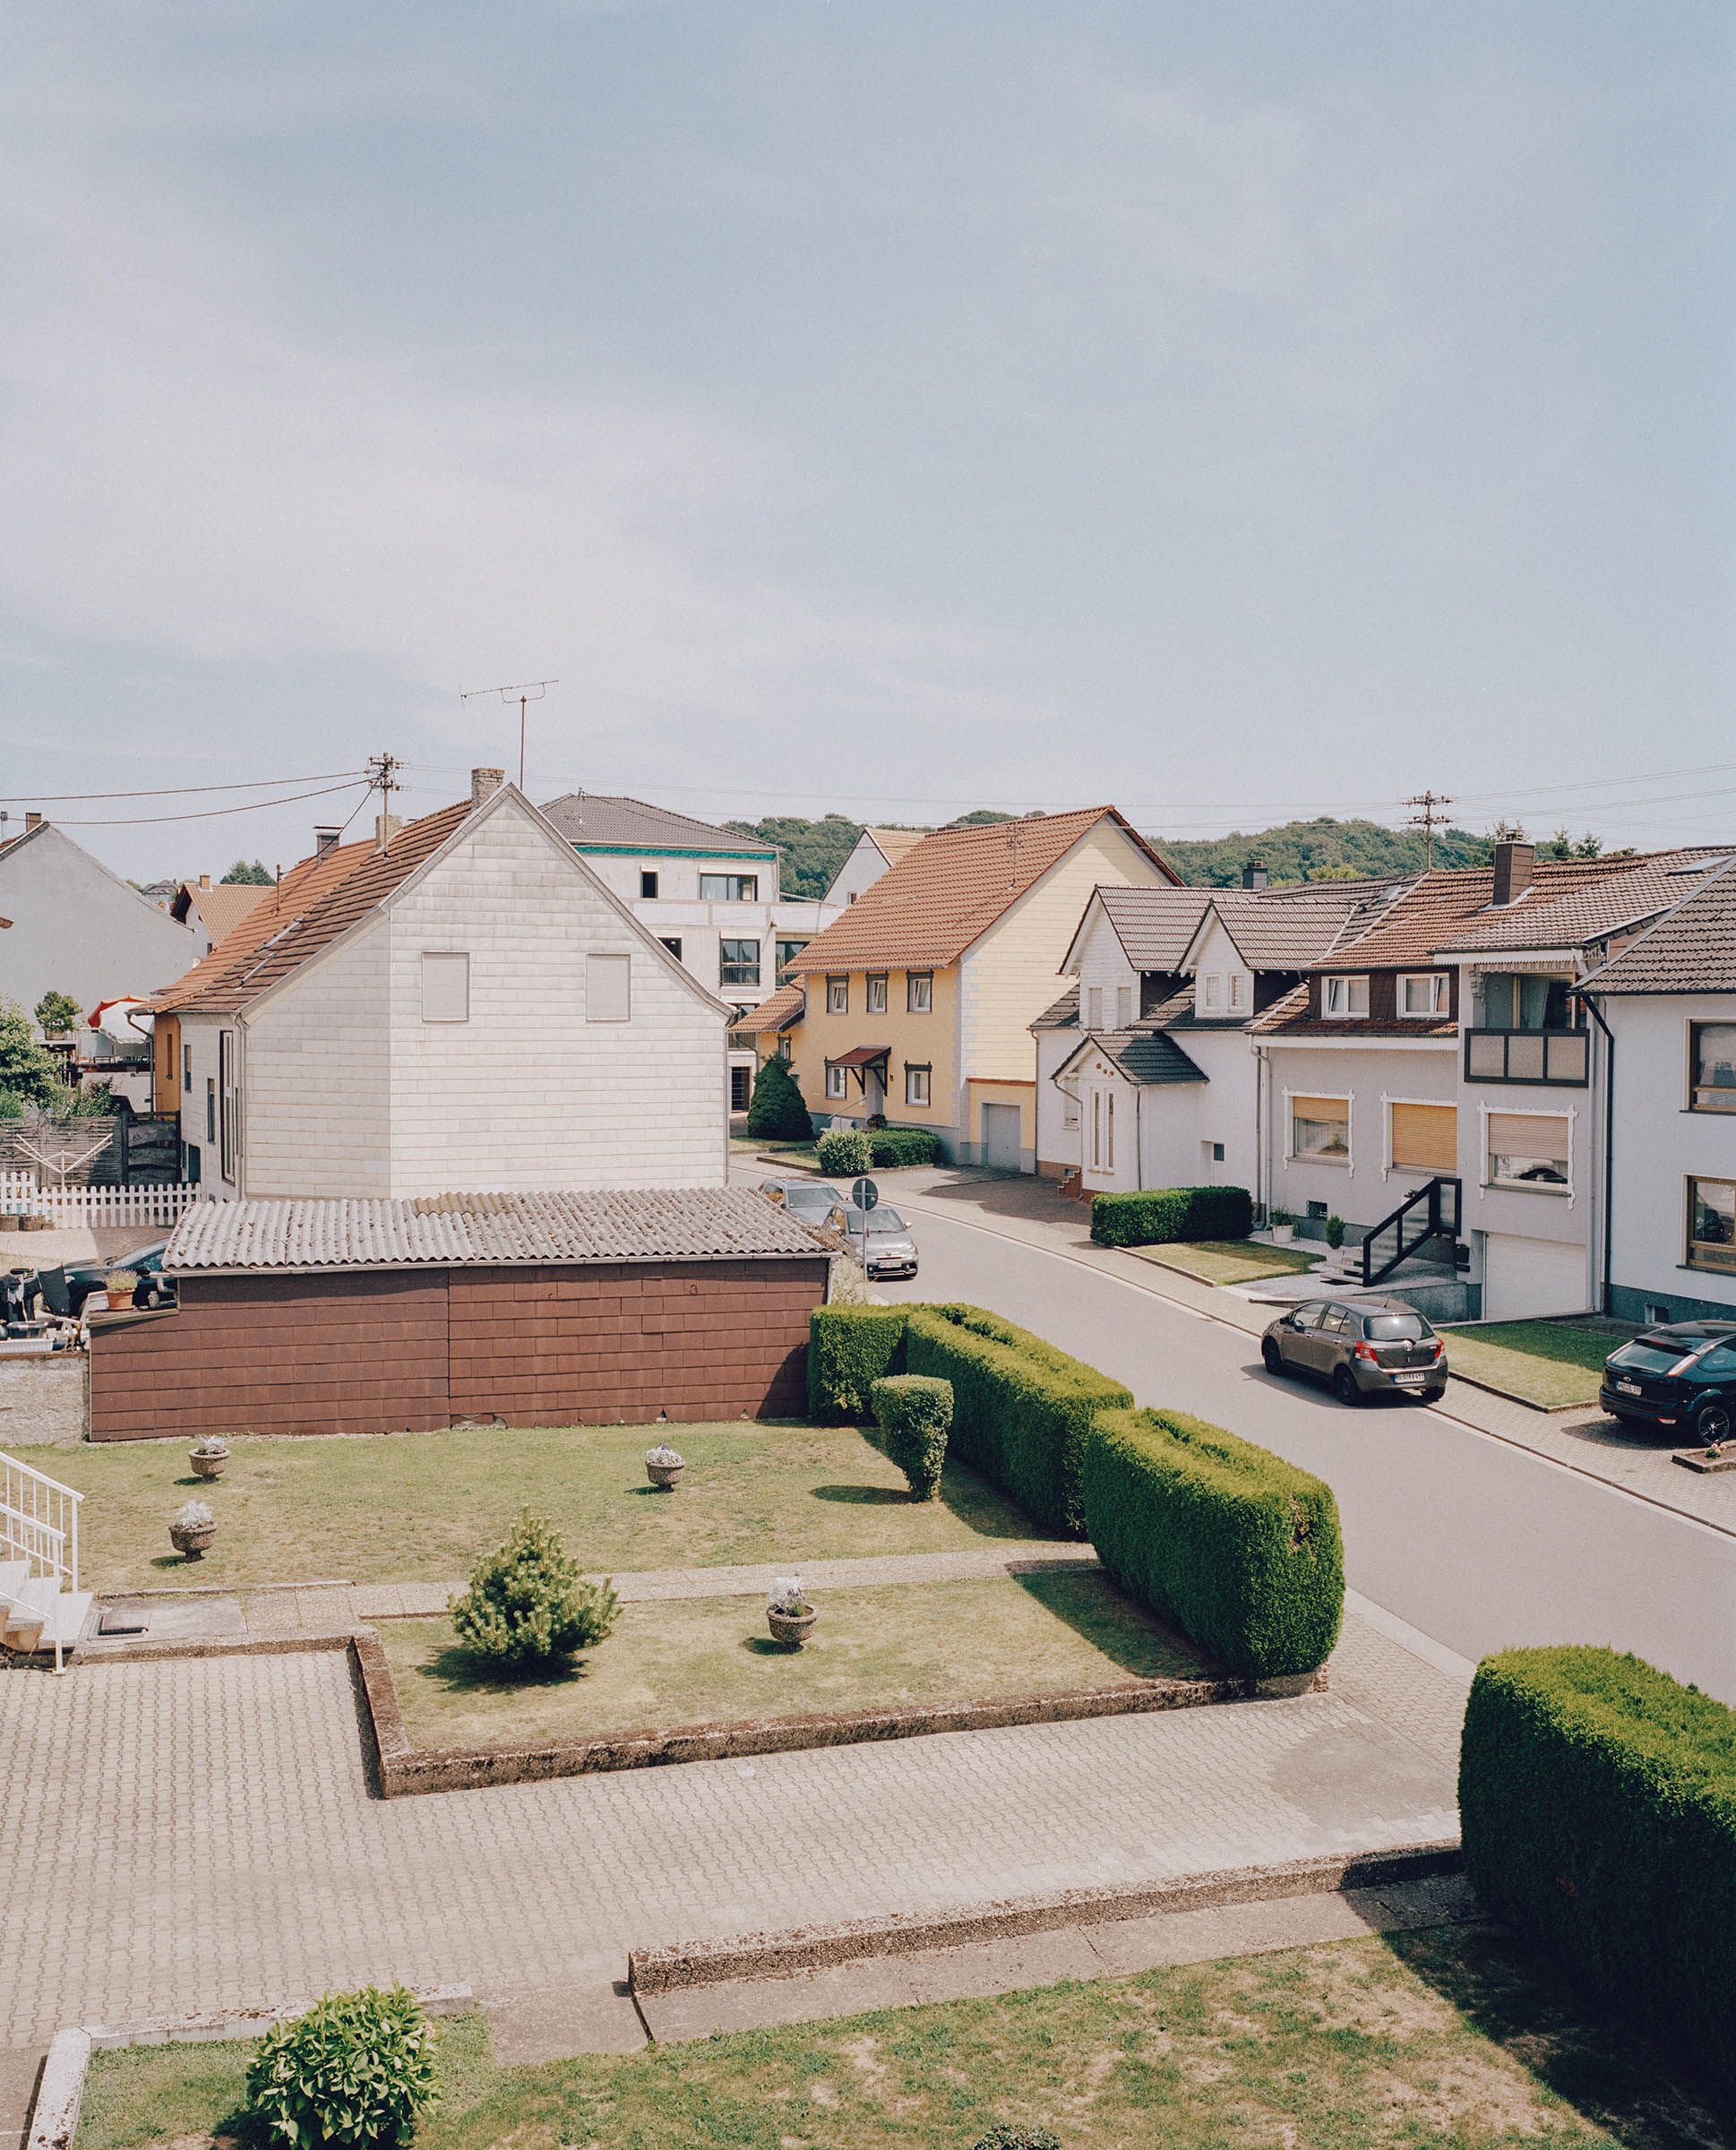 The view from the living room window of Walid Khalil Murad's house, overlooking a street in Theley village in Saarland, southern Germany on July 25, 2019. (Mustafah Abdulaziz for TIME)